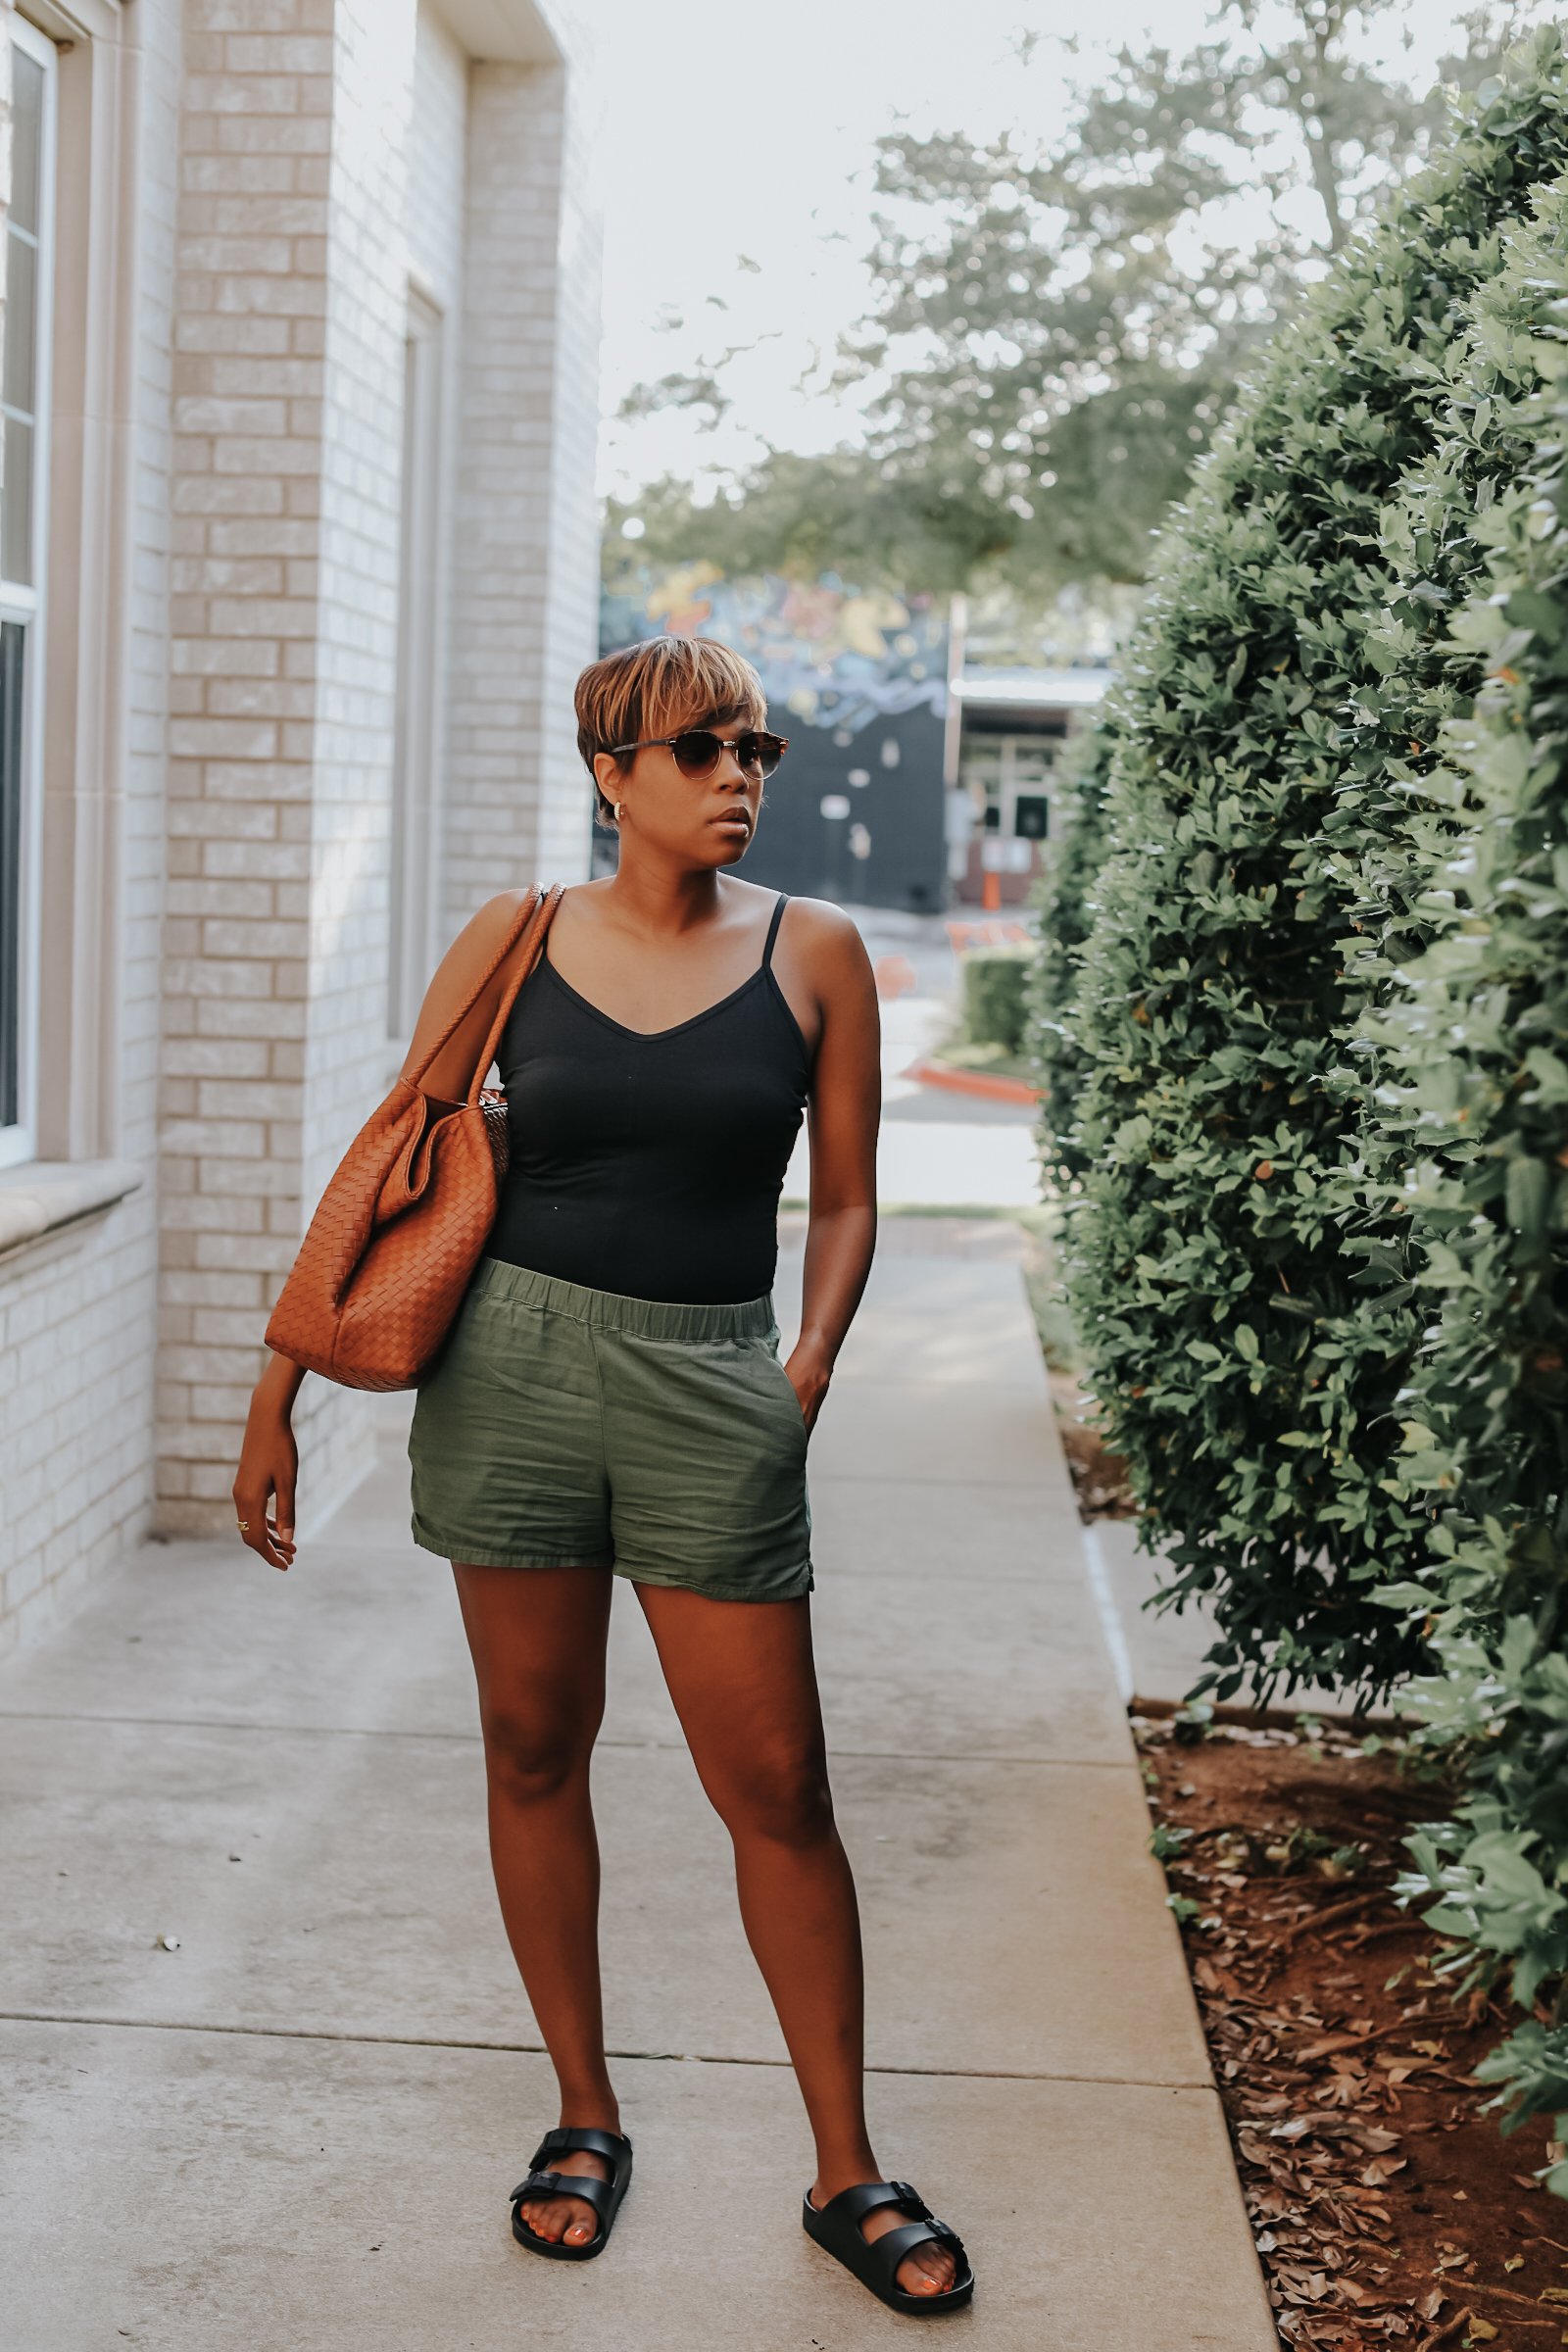 Mary's Little Way wearing Everlane's Cami Bodysuit, Everlane's Easy Shorts, Target's Birkenstock Dupes, and Able Clothing Selam Tote